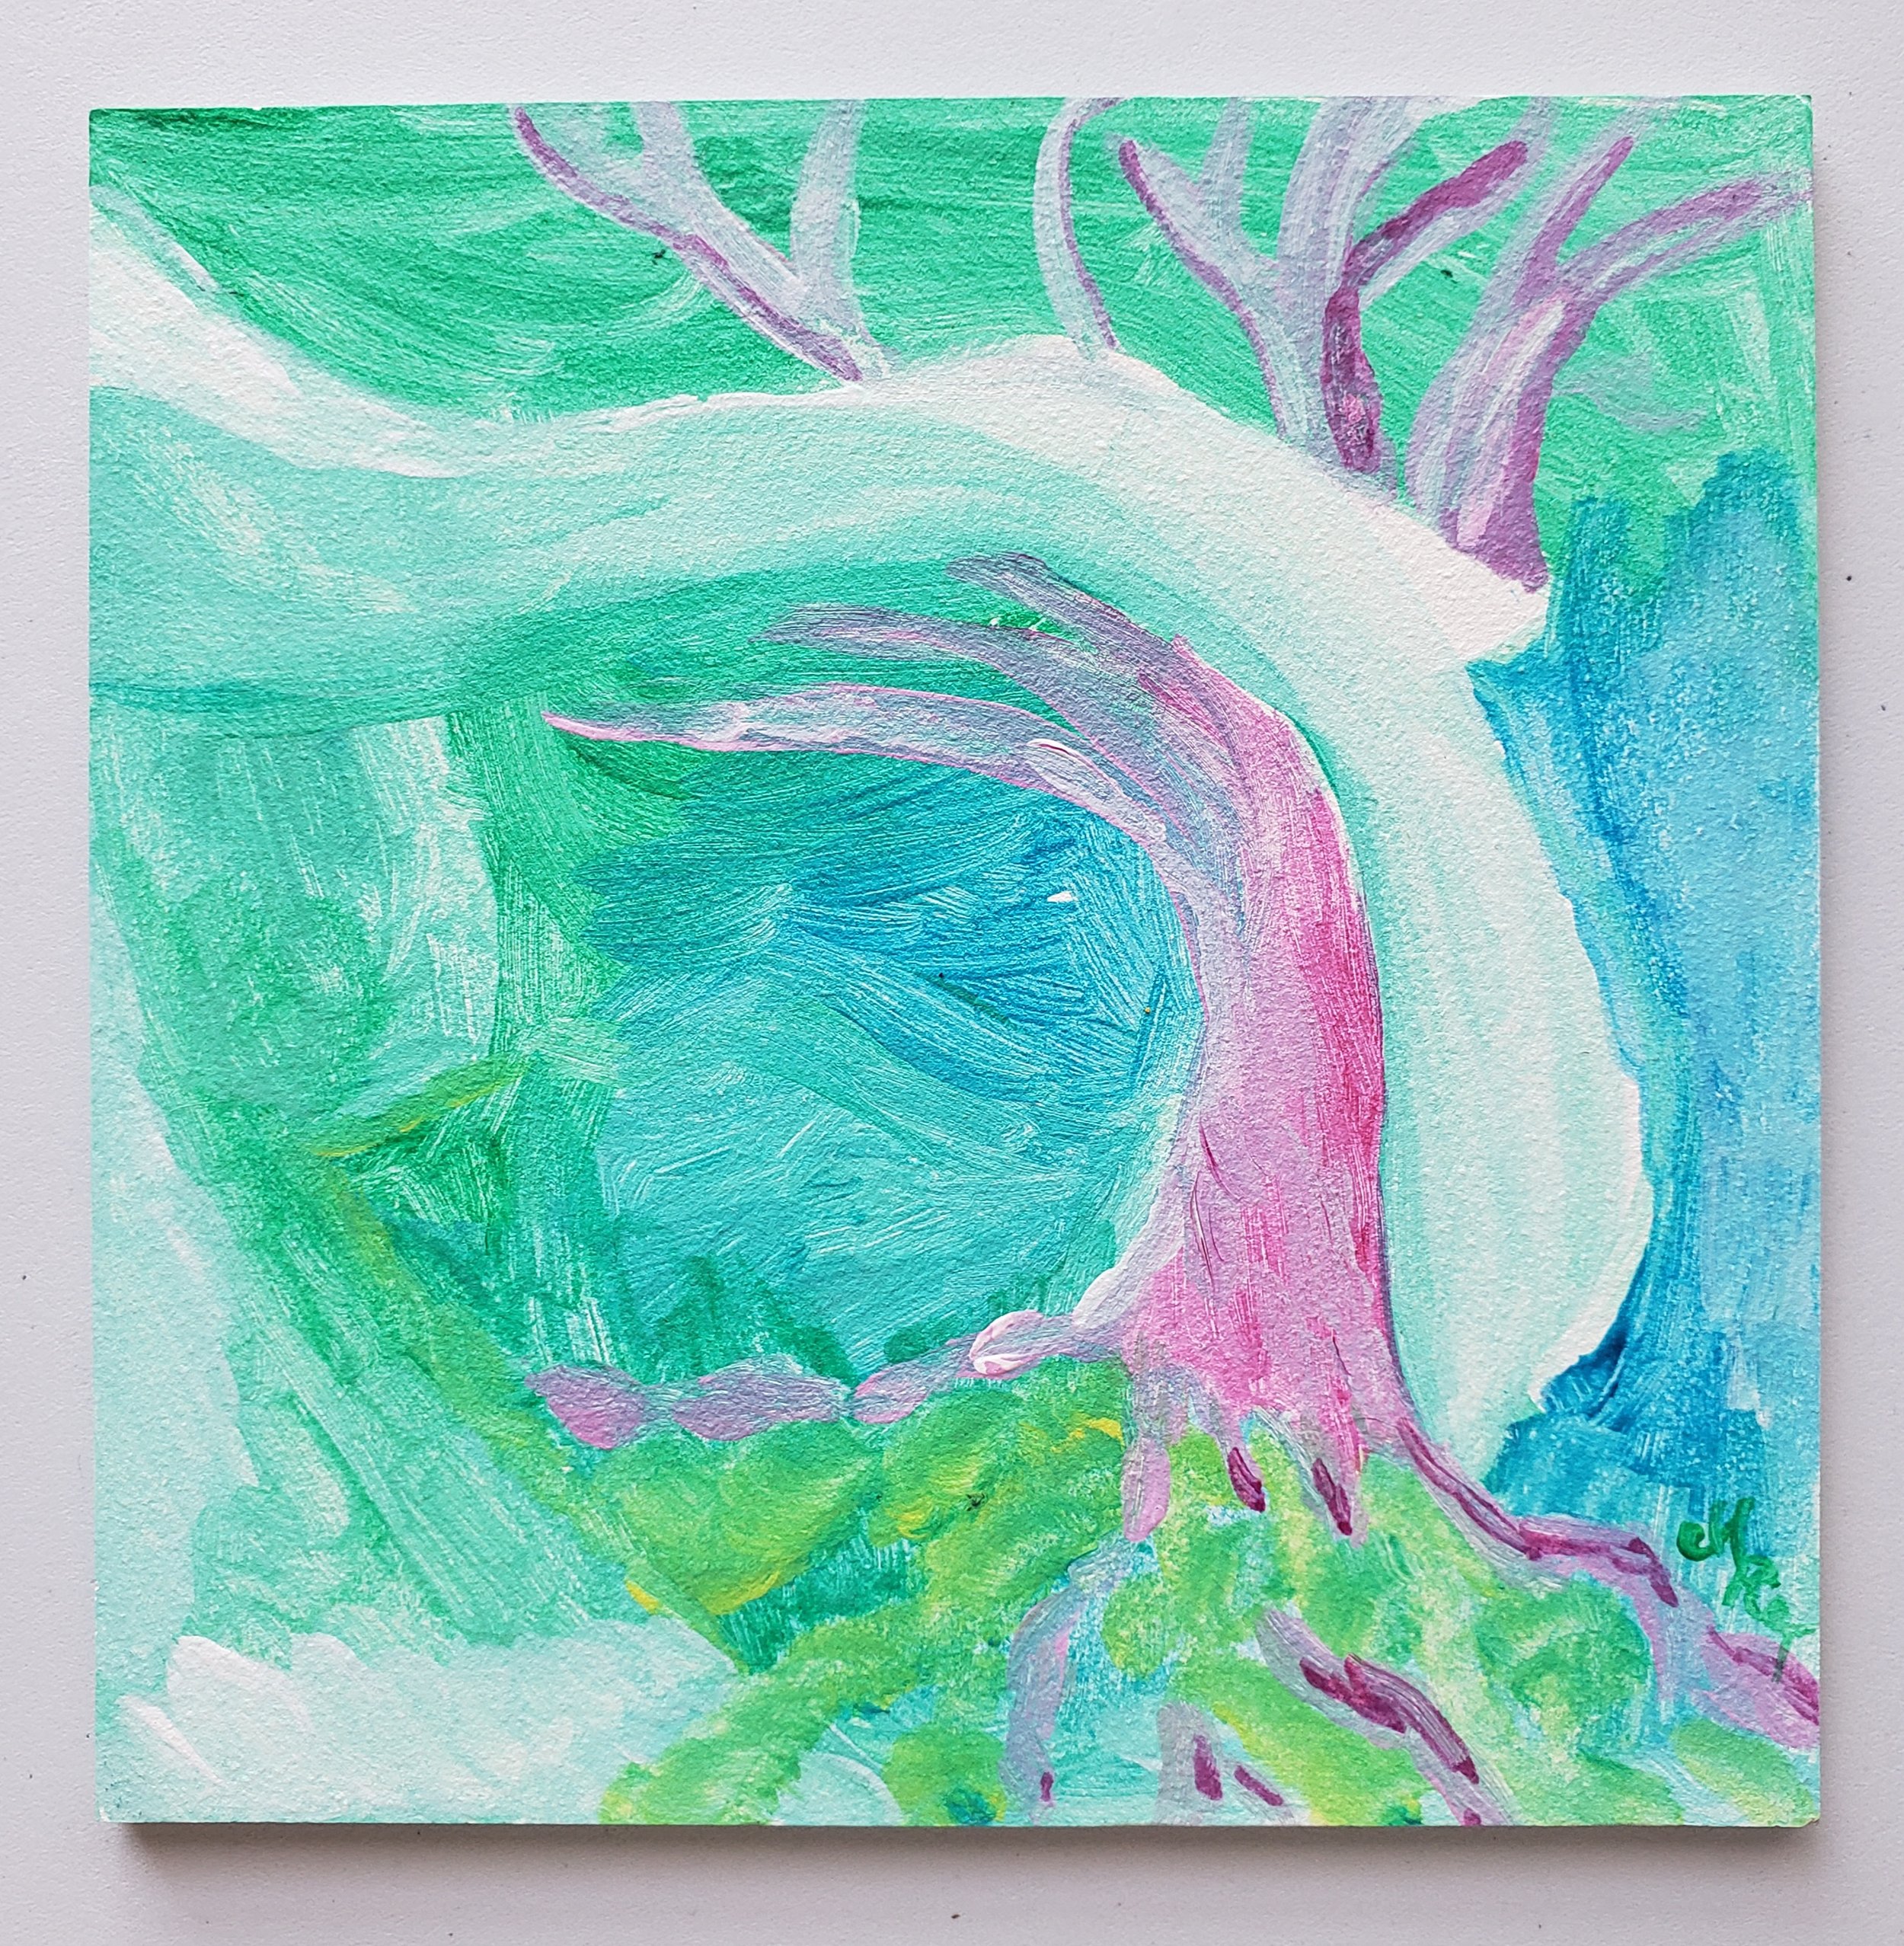 Thawing Roots - 5"x5" 